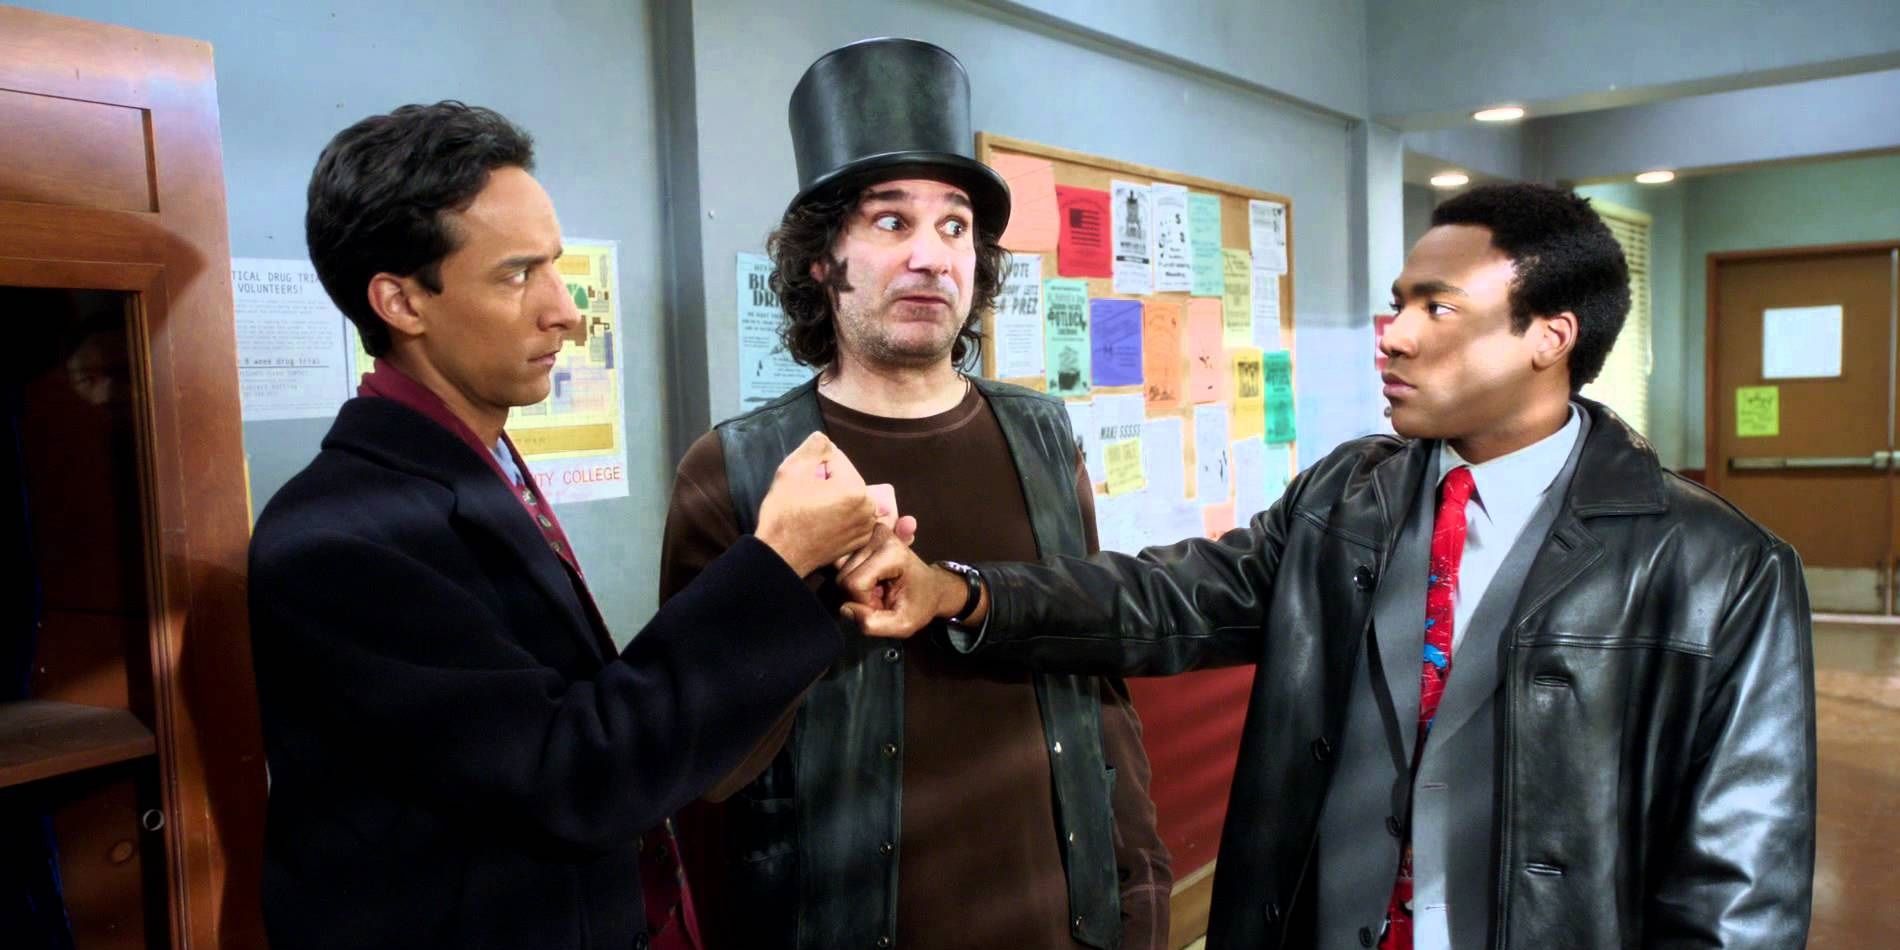 Community 10 Side Characters Who Wouldve Made Great Study Group Additions